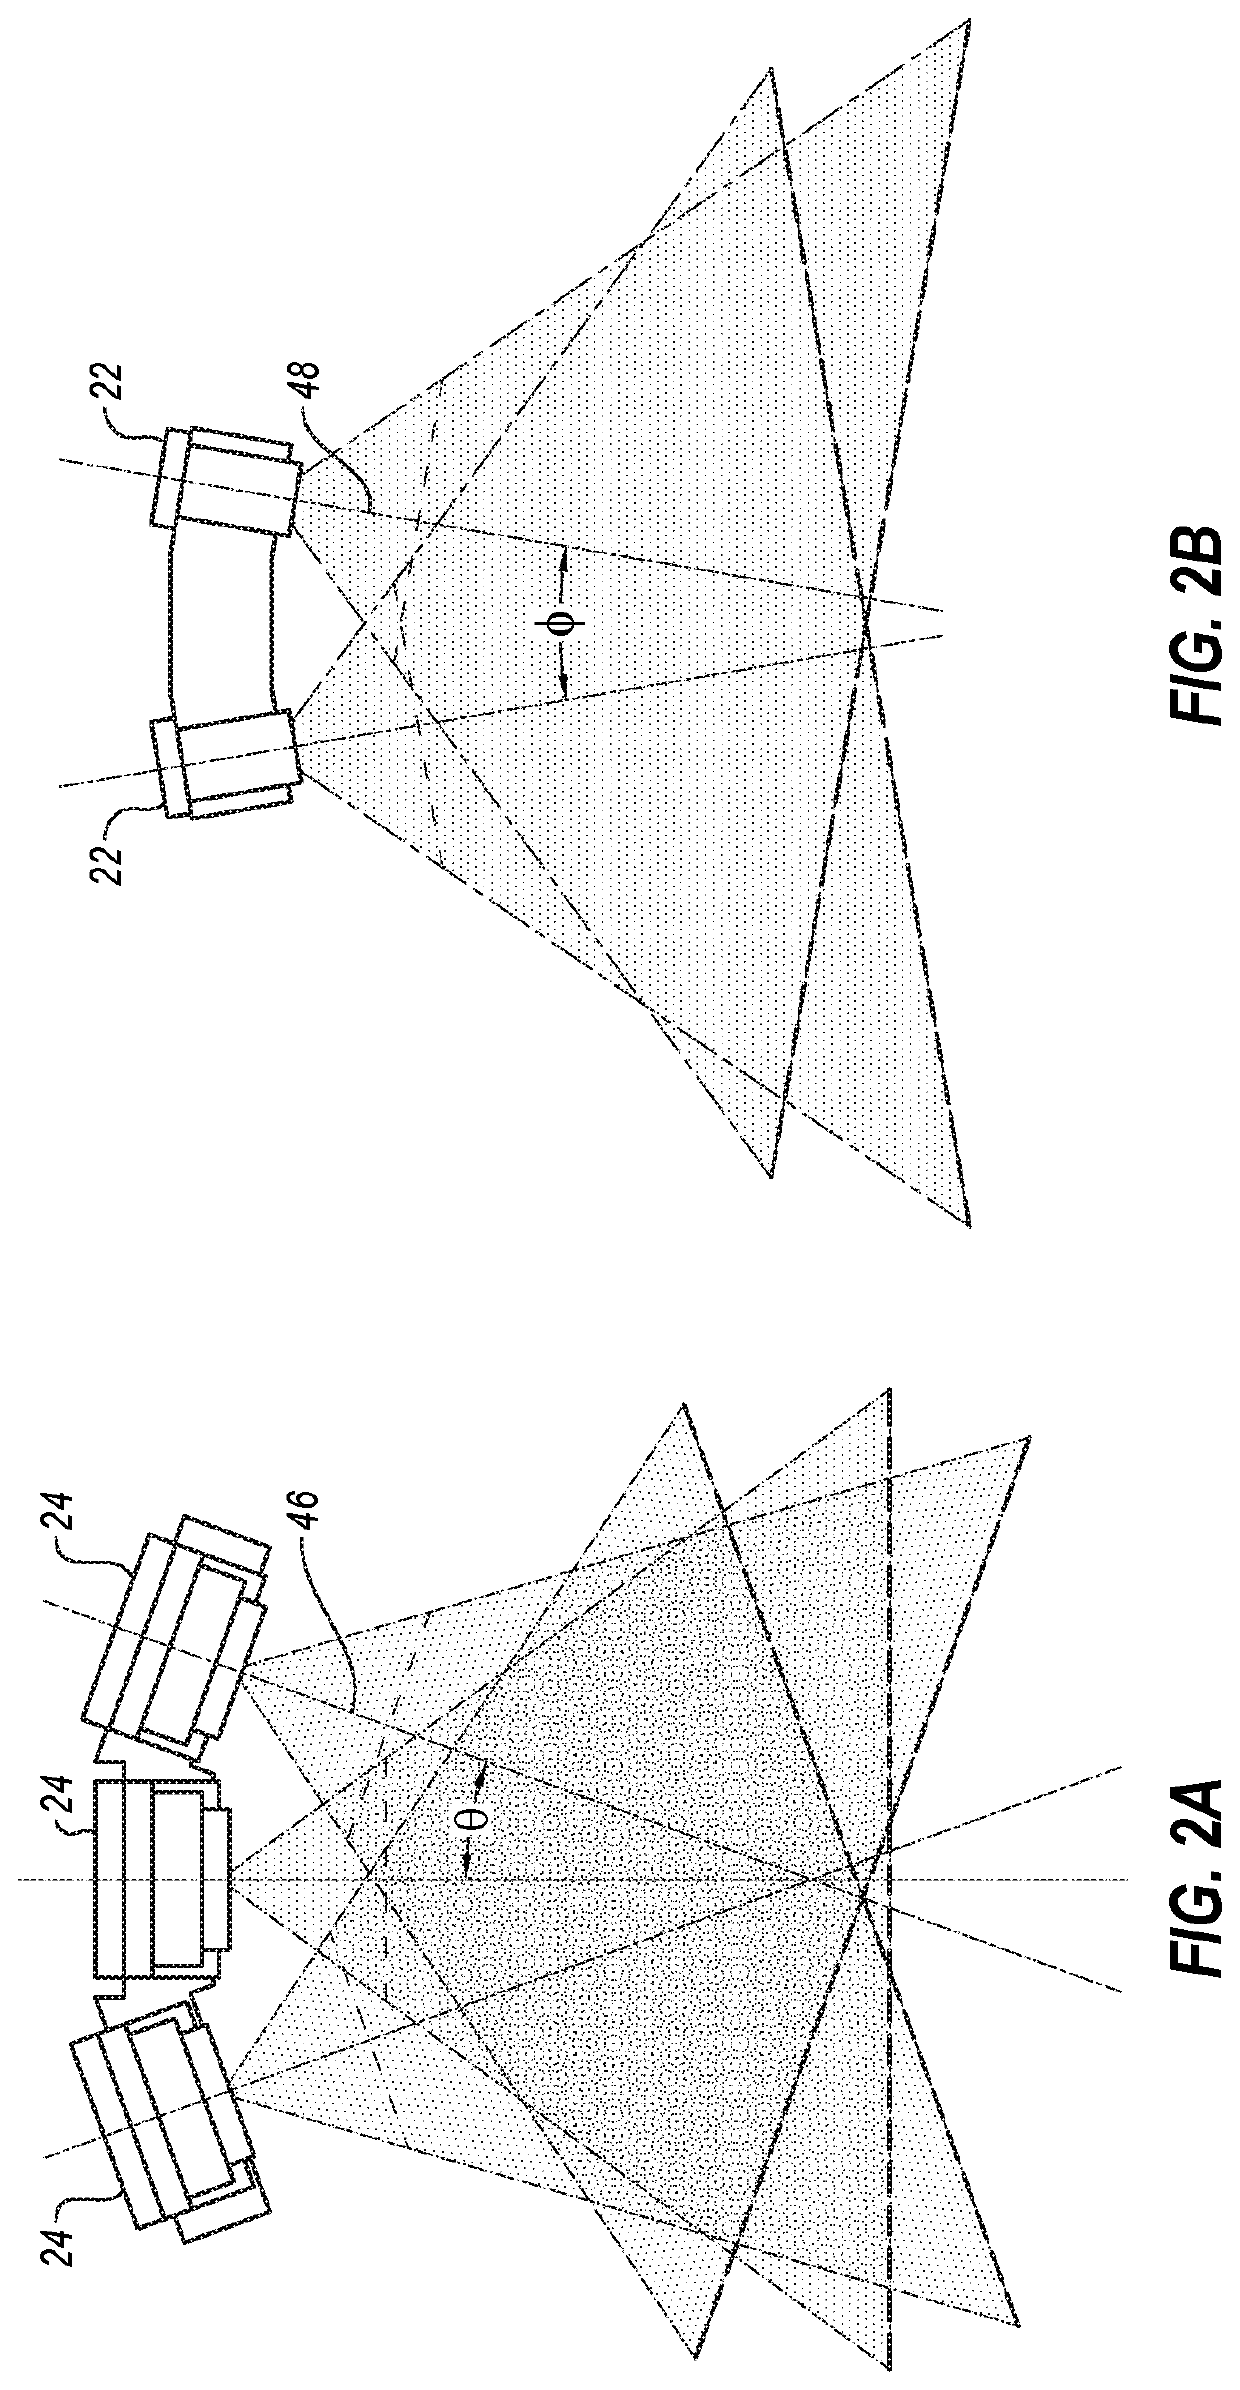 Intraoral 3D scanner employing multiple miniature cameras and multiple miniature pattern projectors